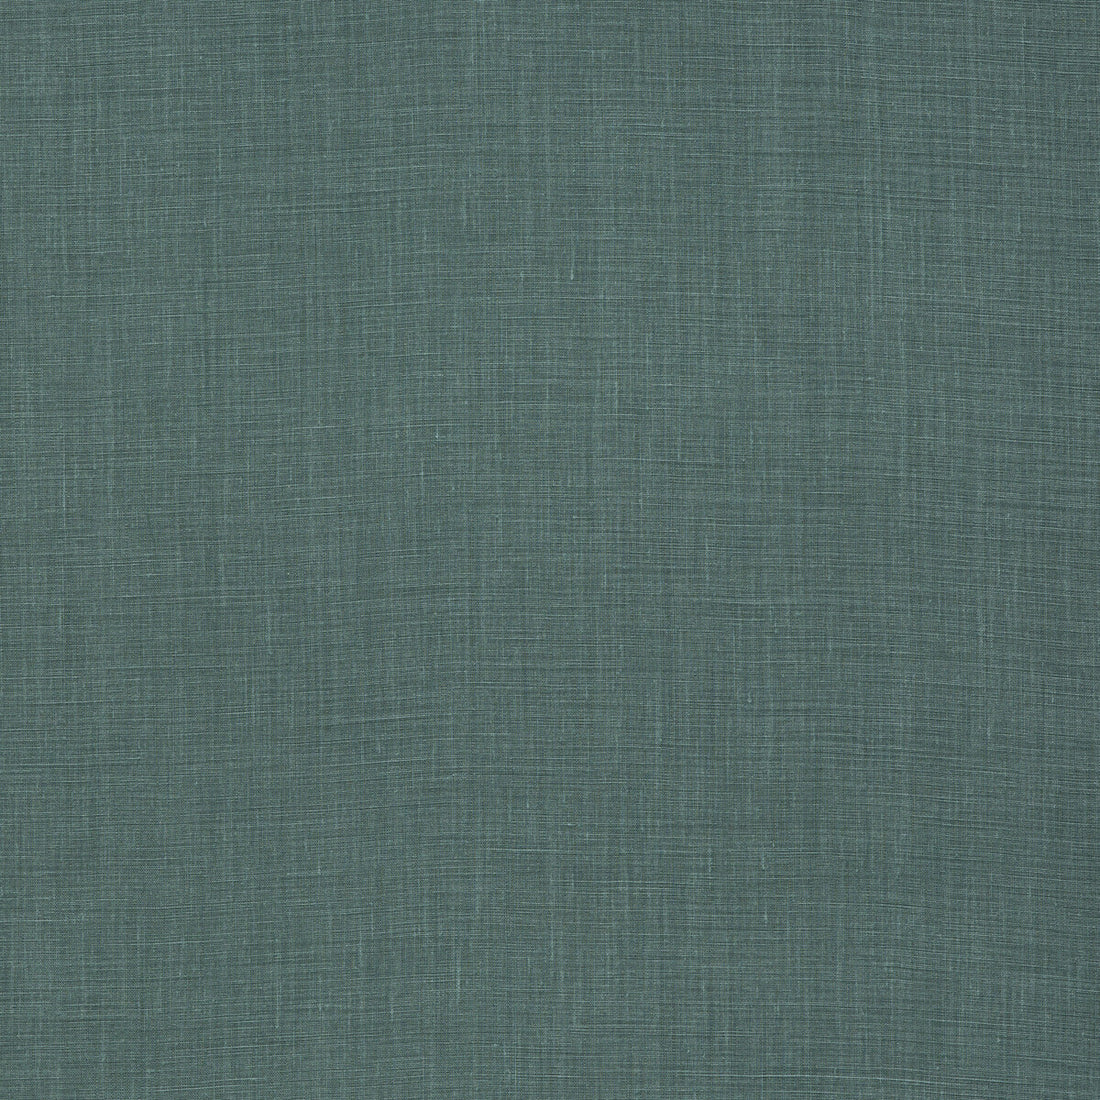 Baker House Linen fabric in emerald color - pattern BF10961.785.0 - by G P &amp; J Baker in the Baker House Linens collection